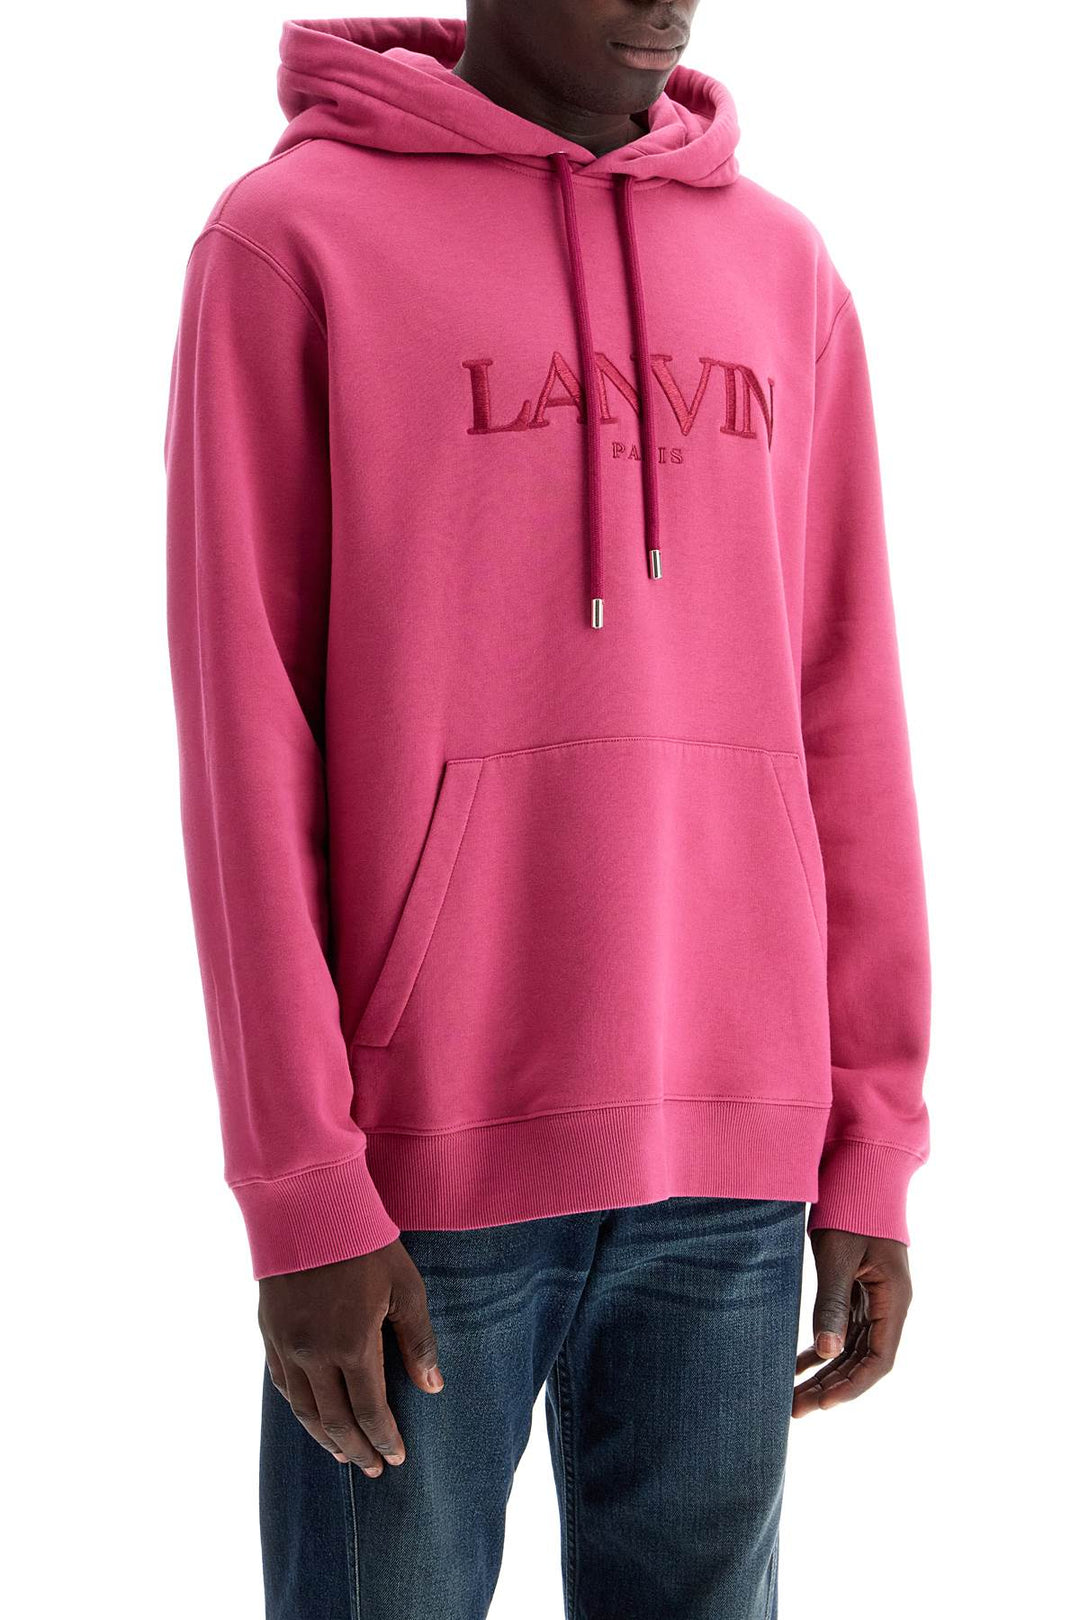 Lanvin Hooded Sweatshirt With Embroidered Logo   Fuchsia